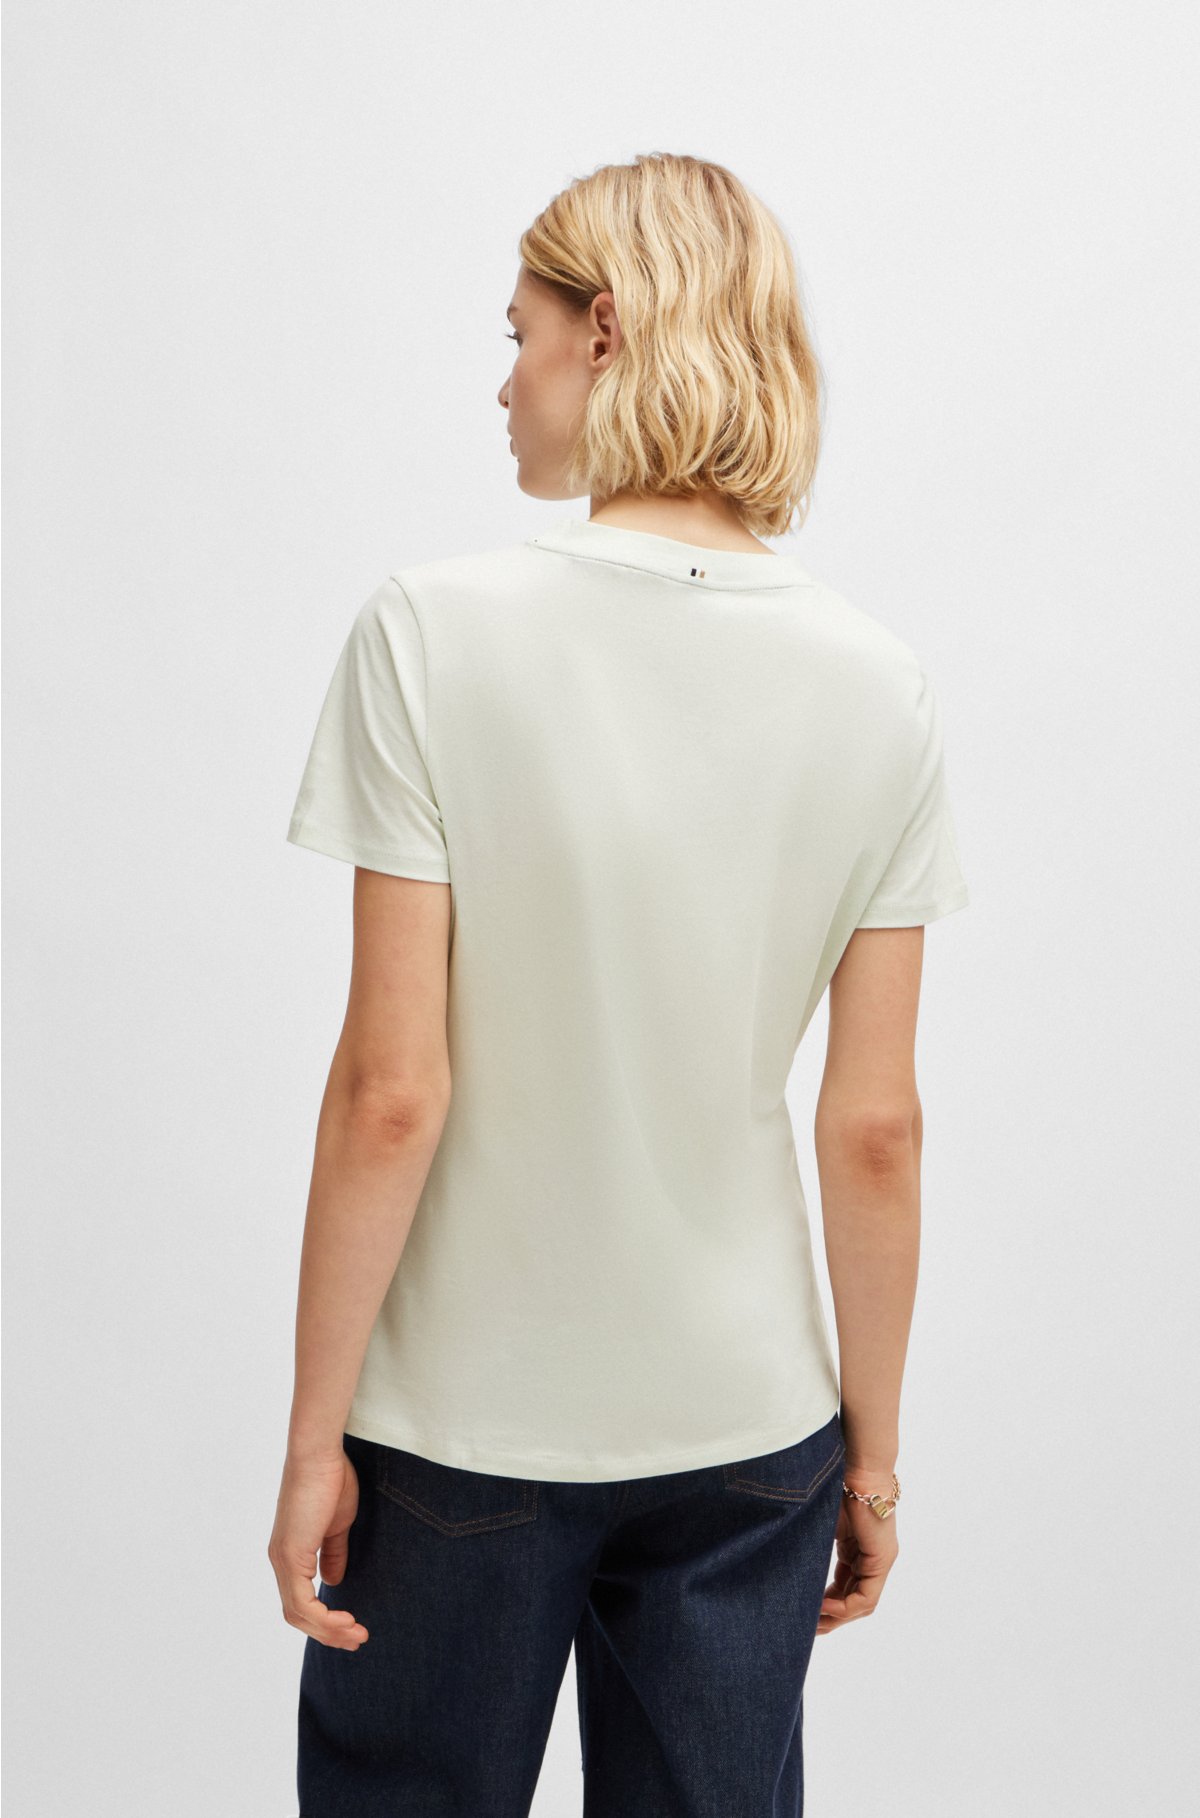 Slim-fit T-shirt in pure cotton with logo detail, Natural